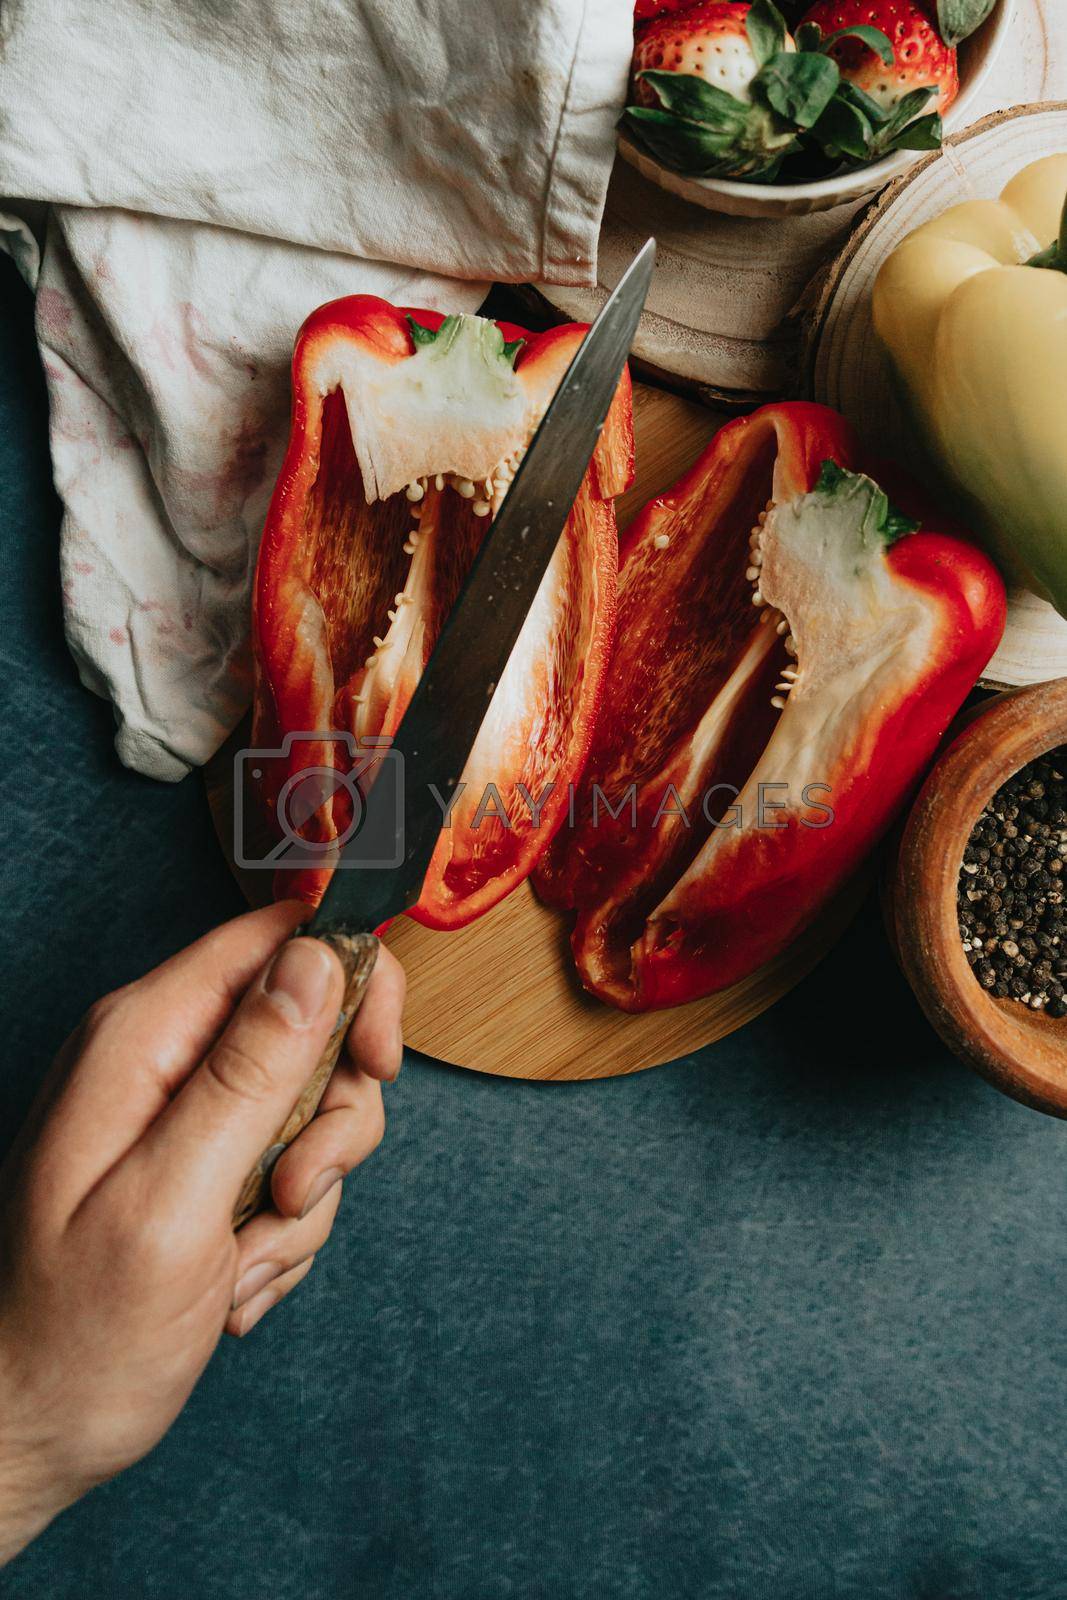 Royalty free image of Mock up of a cooking table with a pepper cut in half a knife with a hand and some condiments by AveCalvar